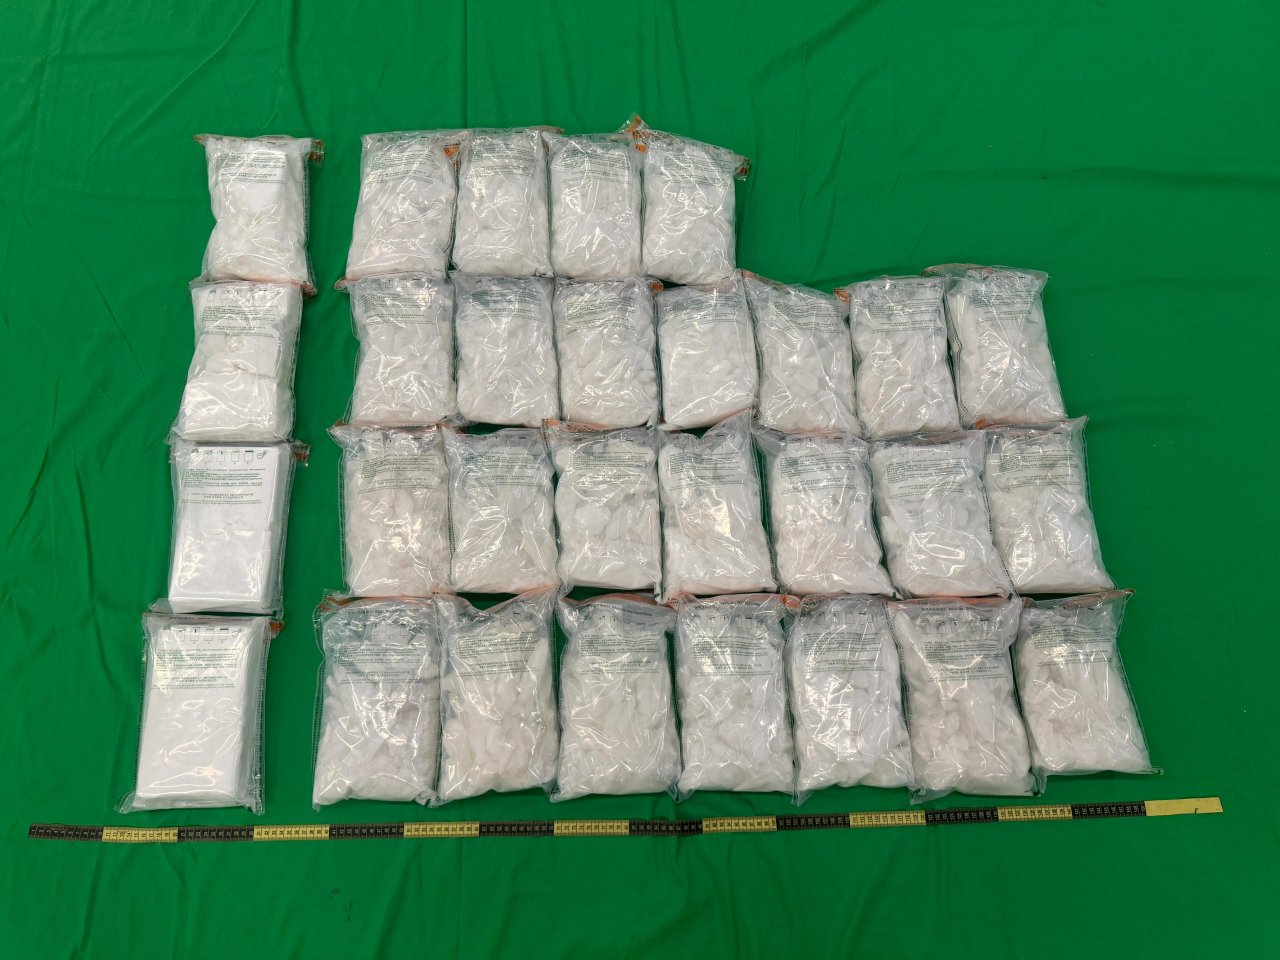 Two arrested and HK$20 million in drugs seized